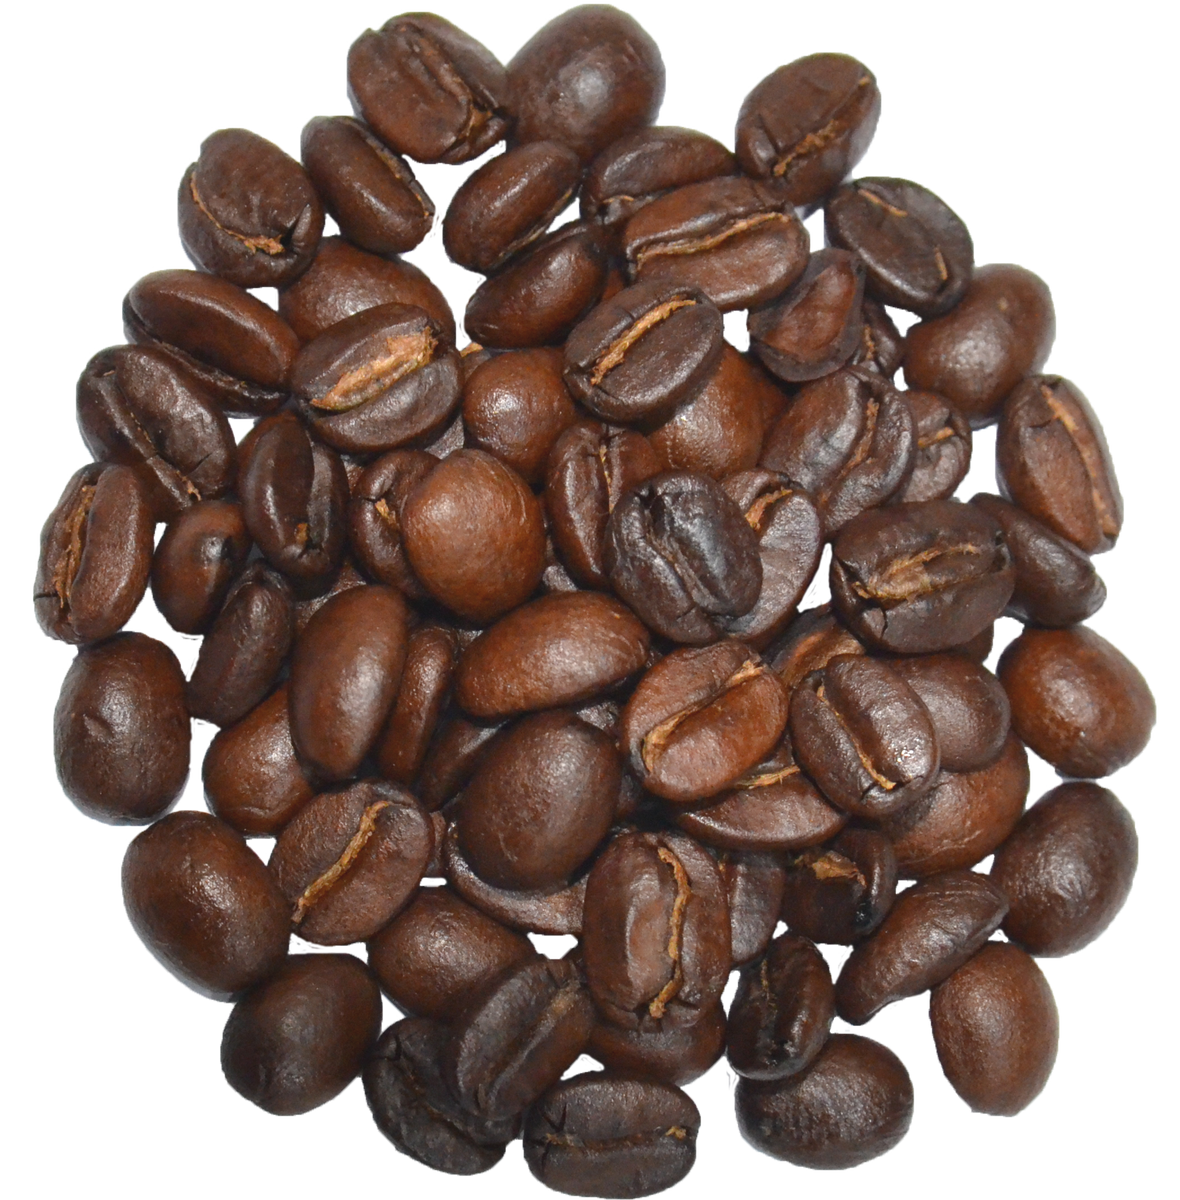 Pile Of Roasted Coffee Beans Transparent Background